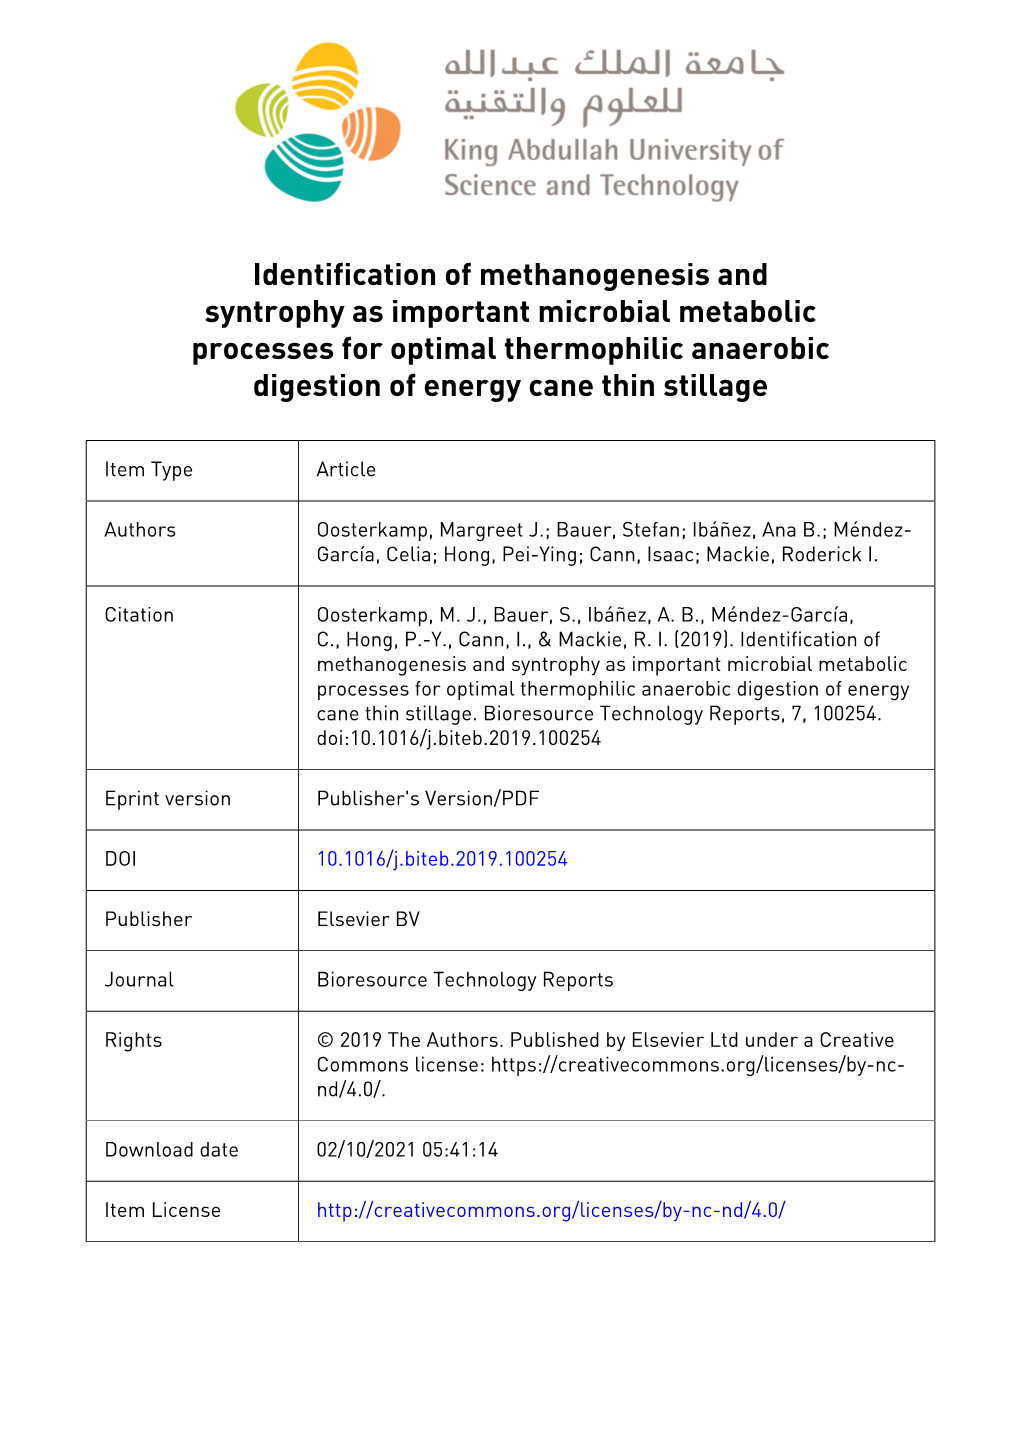 Identification of Methanogenesis and Syntrophy As Important Microbial Metabolic Processes for Optimal Thermophilic Anaerobic Digestion of Energy Cane Thin Stillage